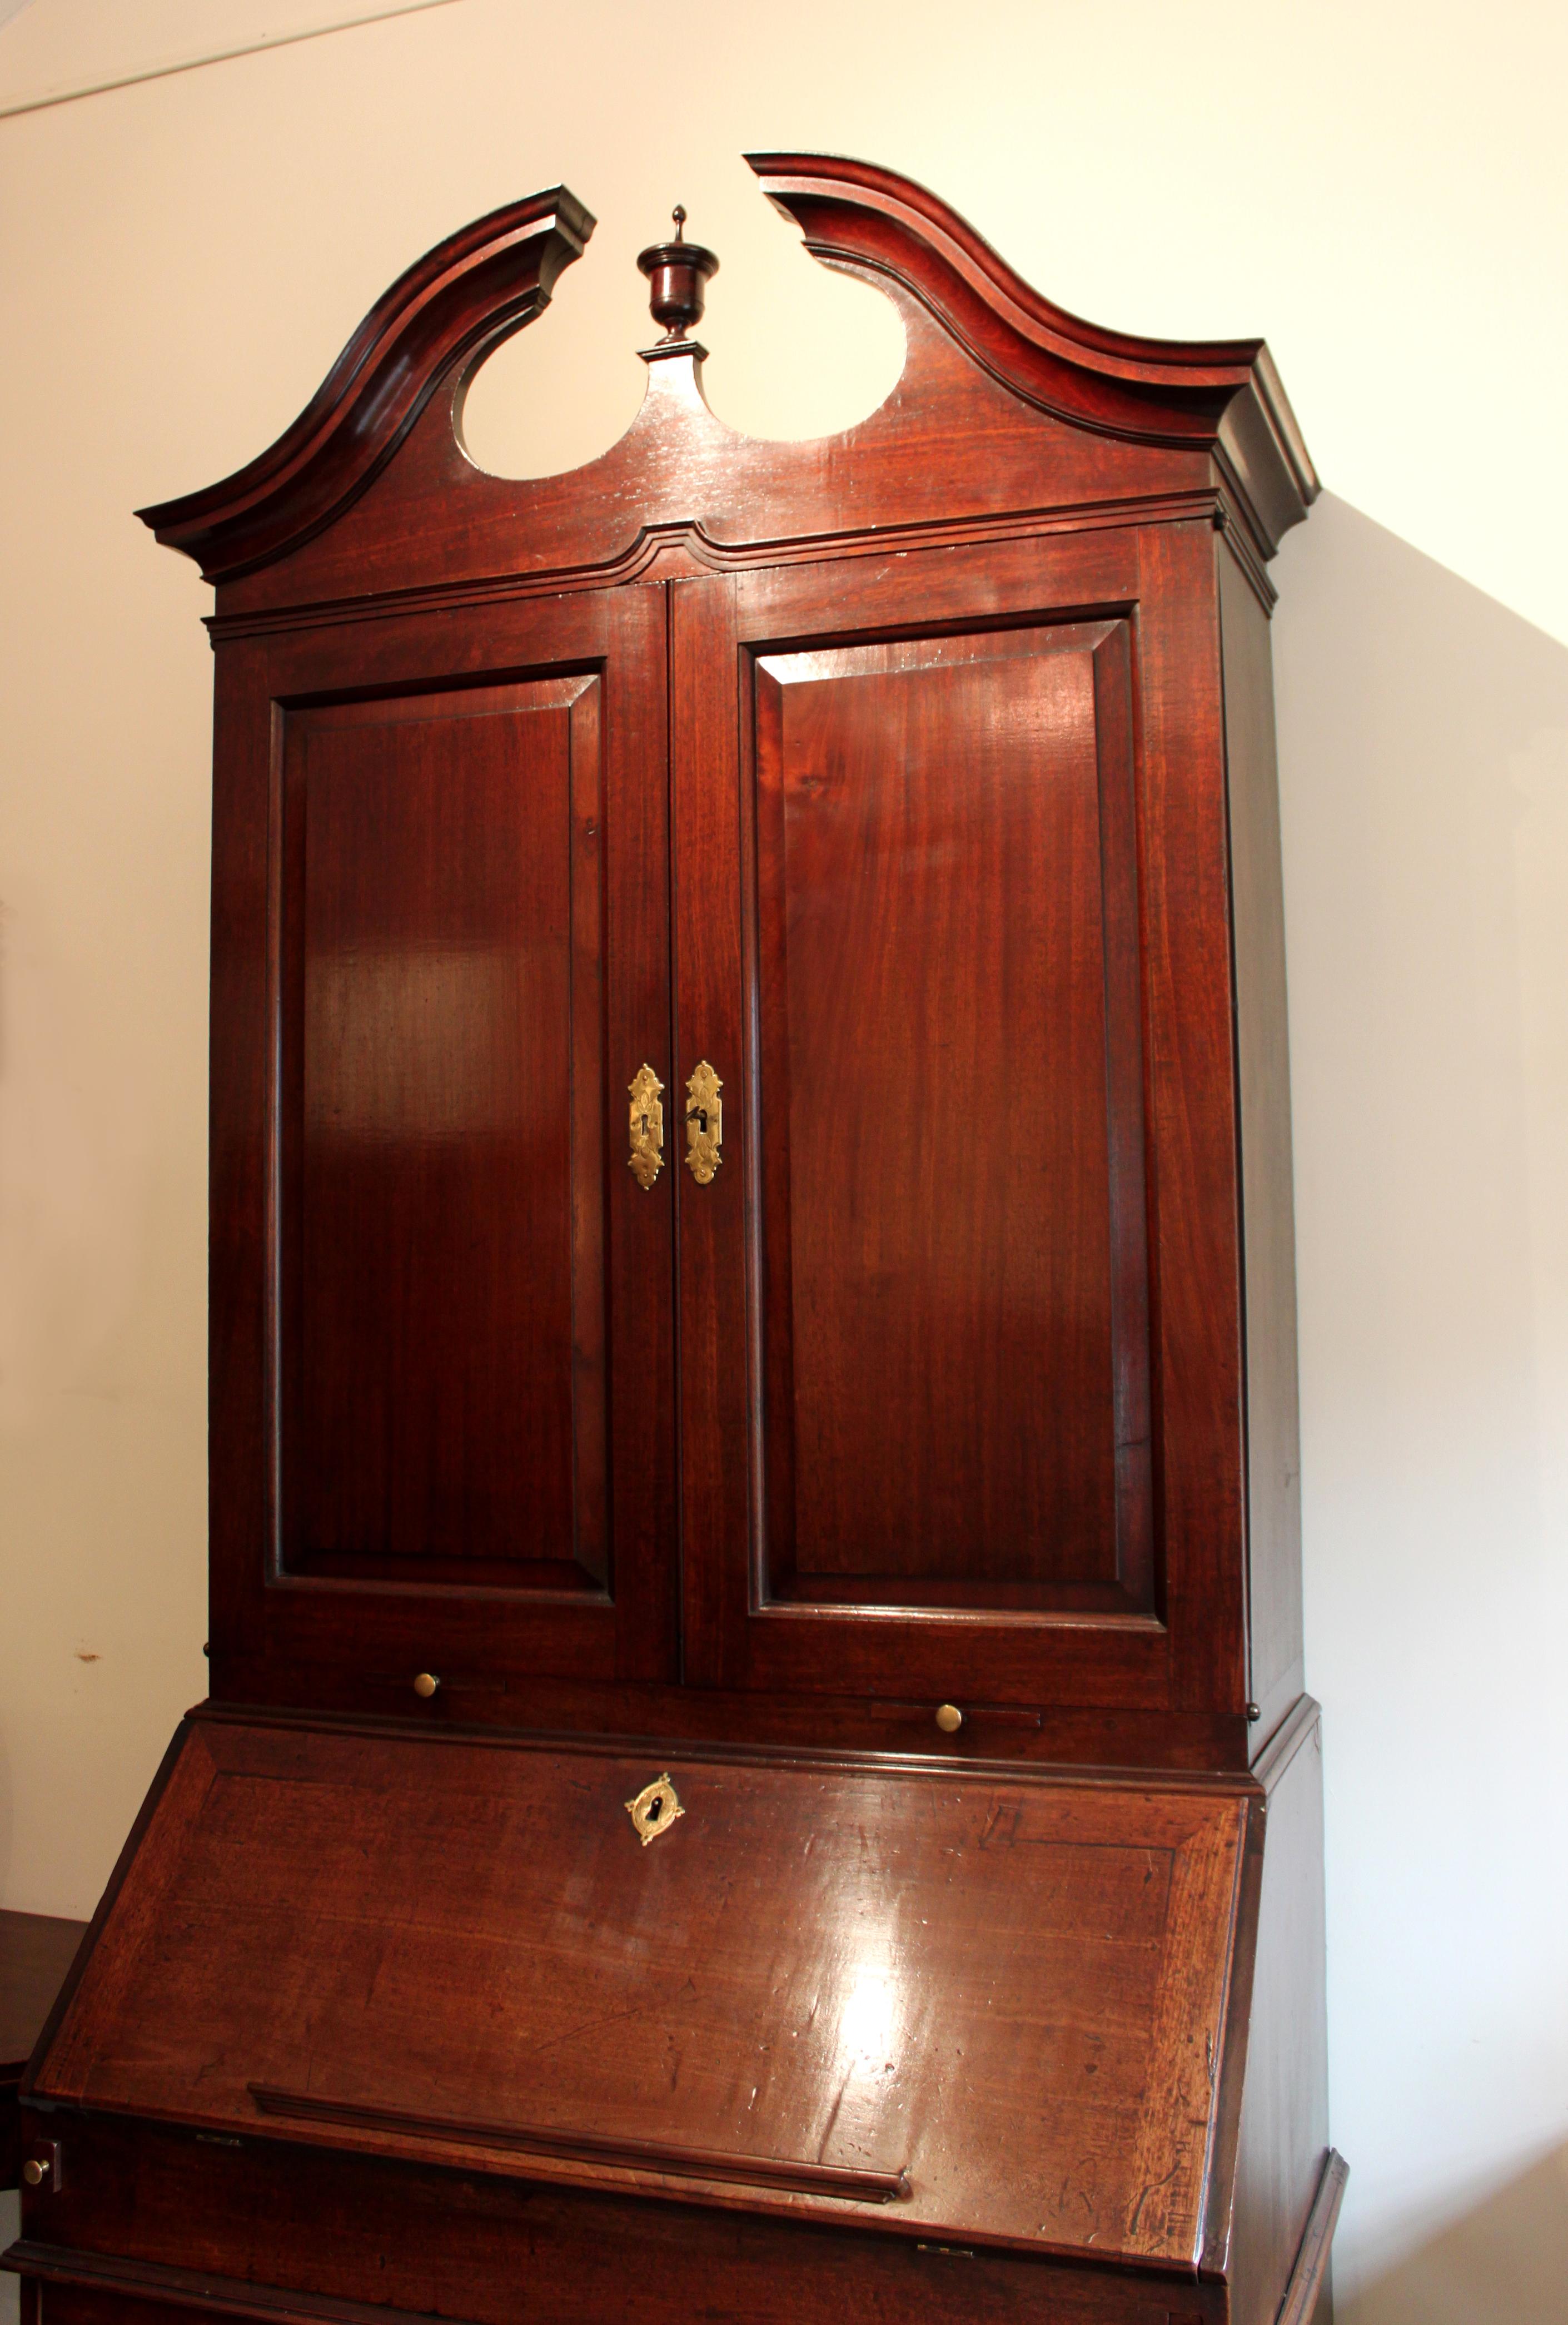 A handsome early Georgian mahogany bureau bookcase with pedimented top; the bookcase section with fielded panel doors and candle slides, the bureau with a well fitted interior, secret drawers, a well and waist moulding